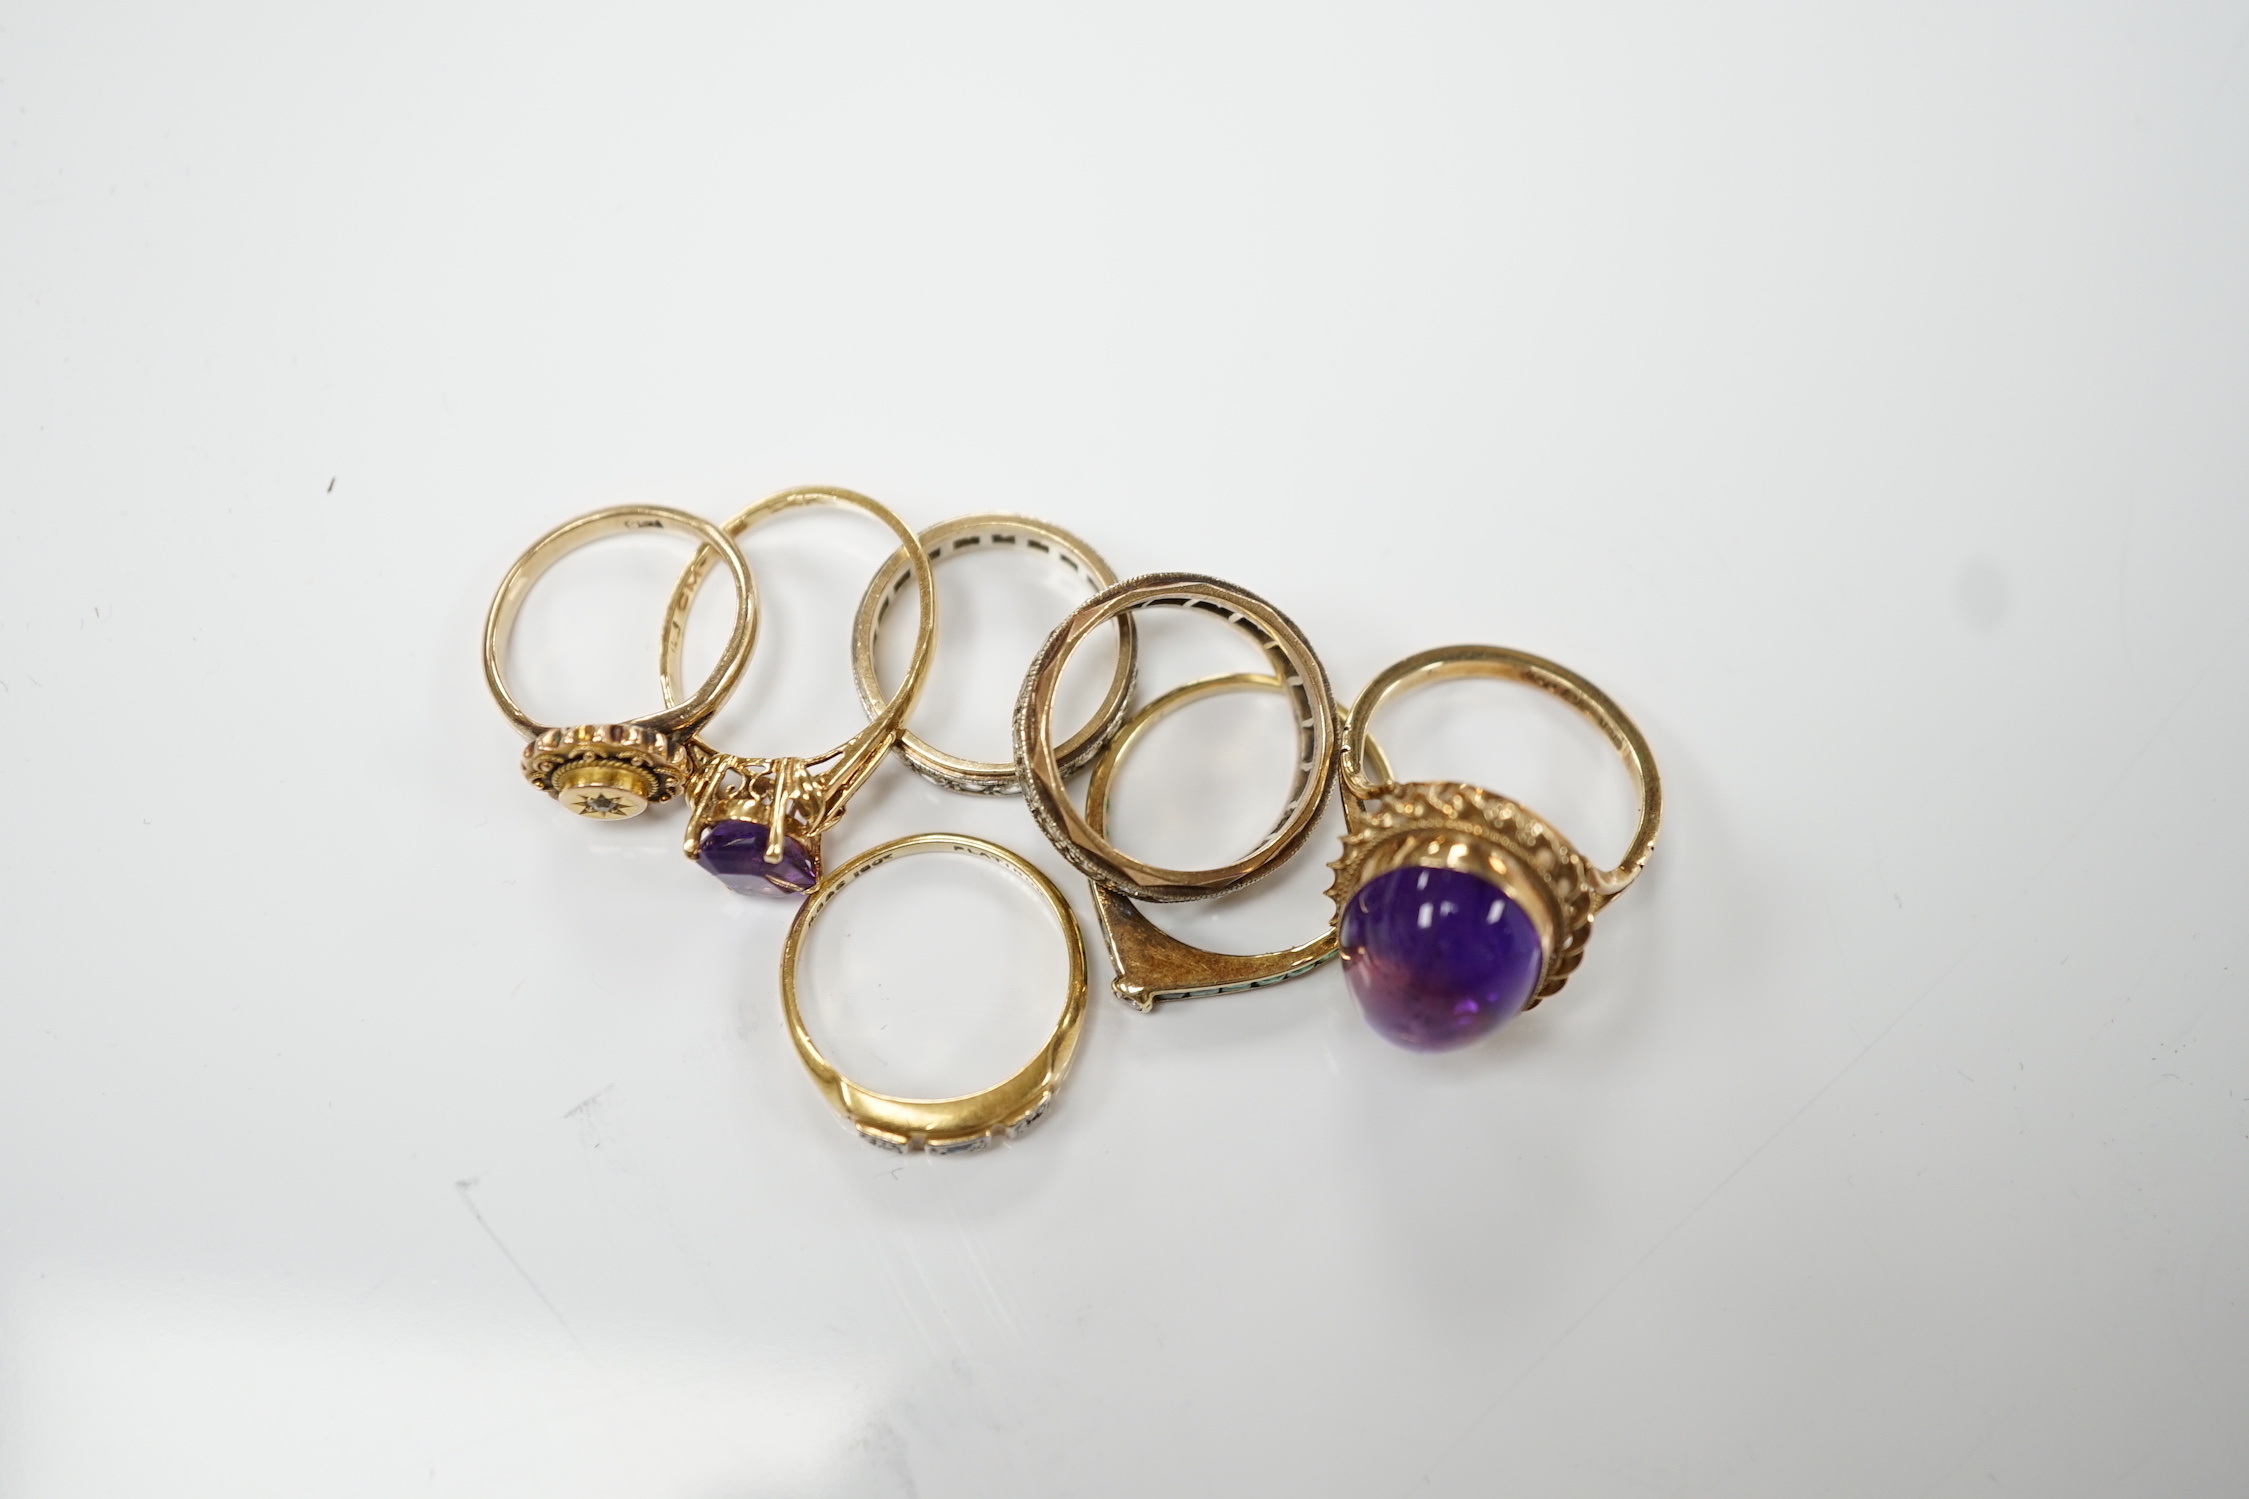 Five assorted 9ct and gems set rings including cabochon amethyst, gross weight 15.1 grams, an 18ct and gem set ring and a 585 emerald and diamond set ring